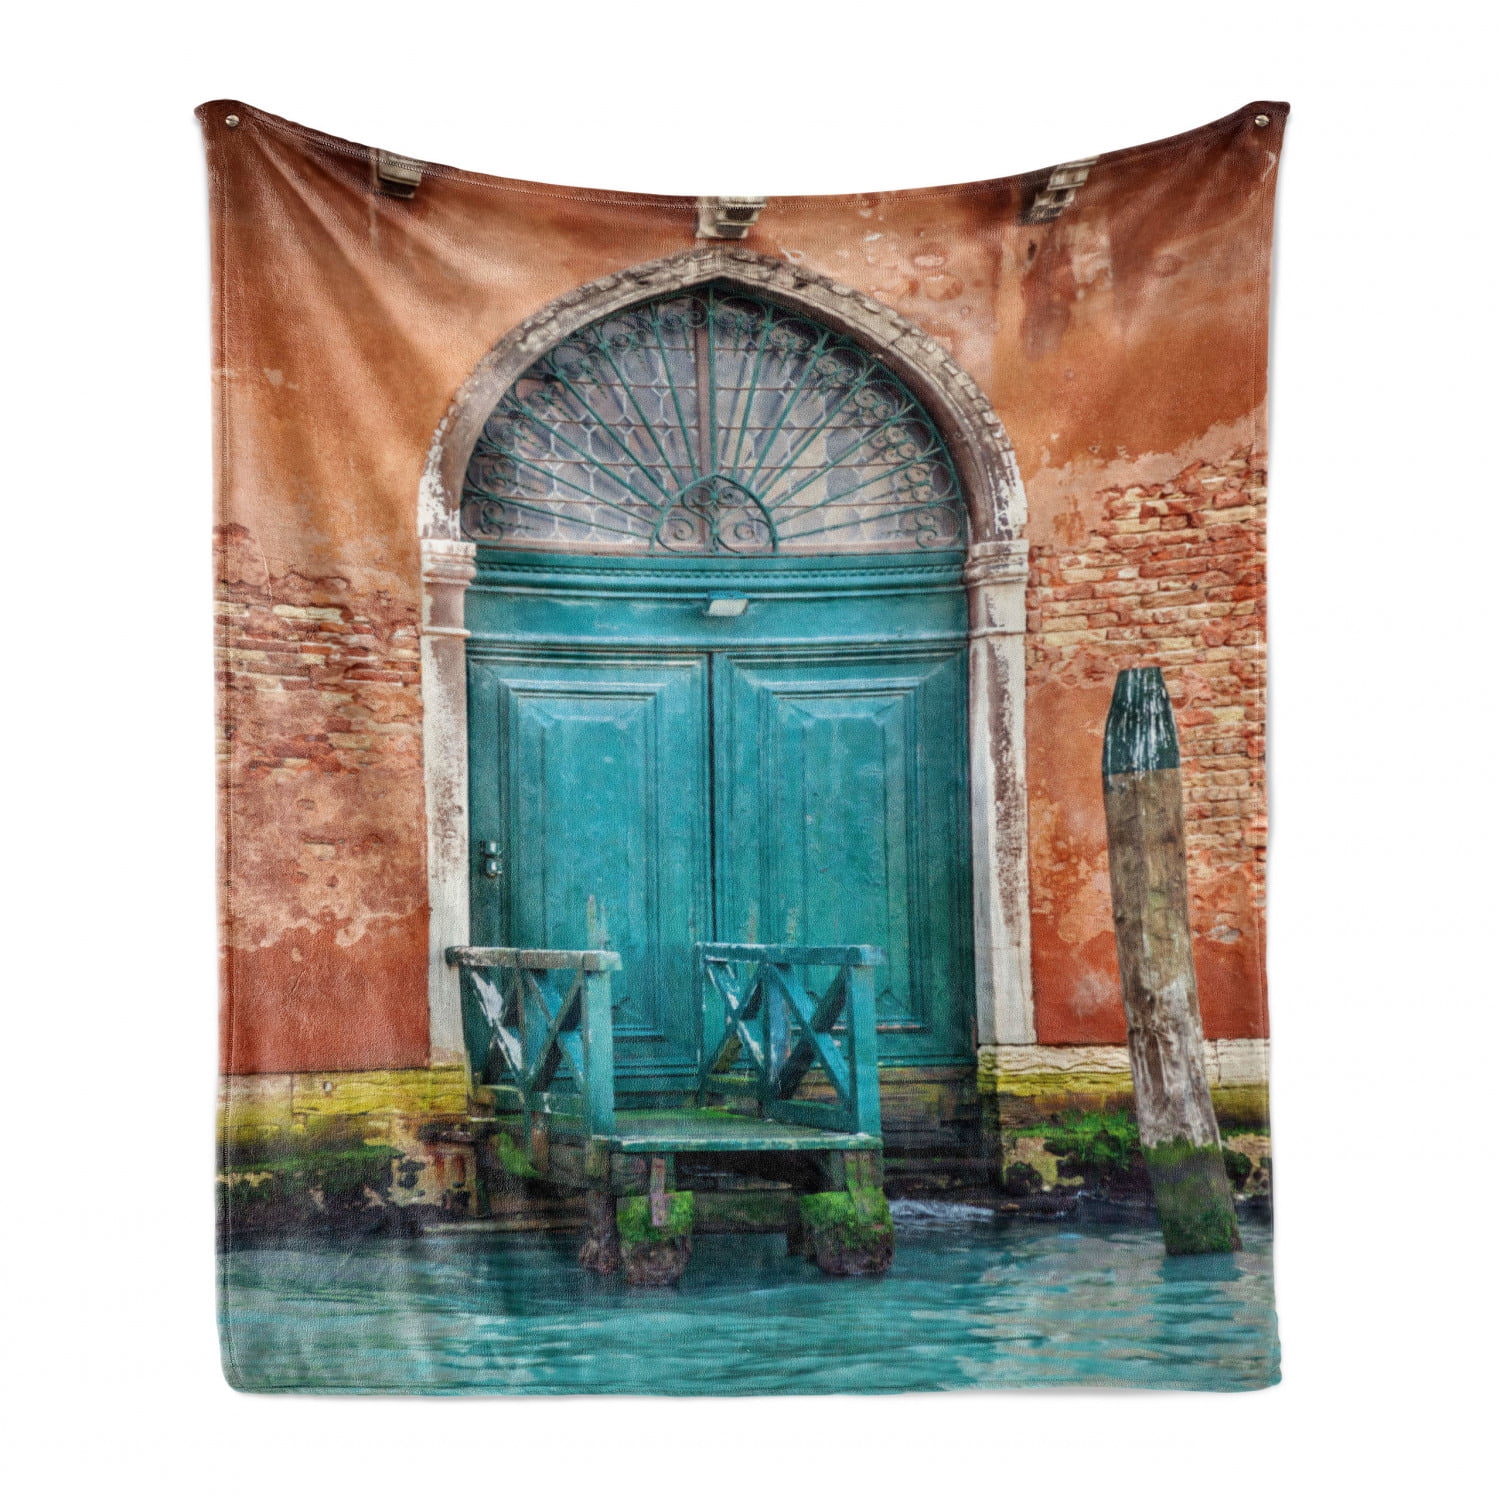 60 x 80 Ambesonne Venice Soft Flannel Fleece Throw Blanket Building with Antique Door Entrance City on Water Historical Urban Cinnamon Sky Blue Cozy Plush for Indoor and Outdoor Use 